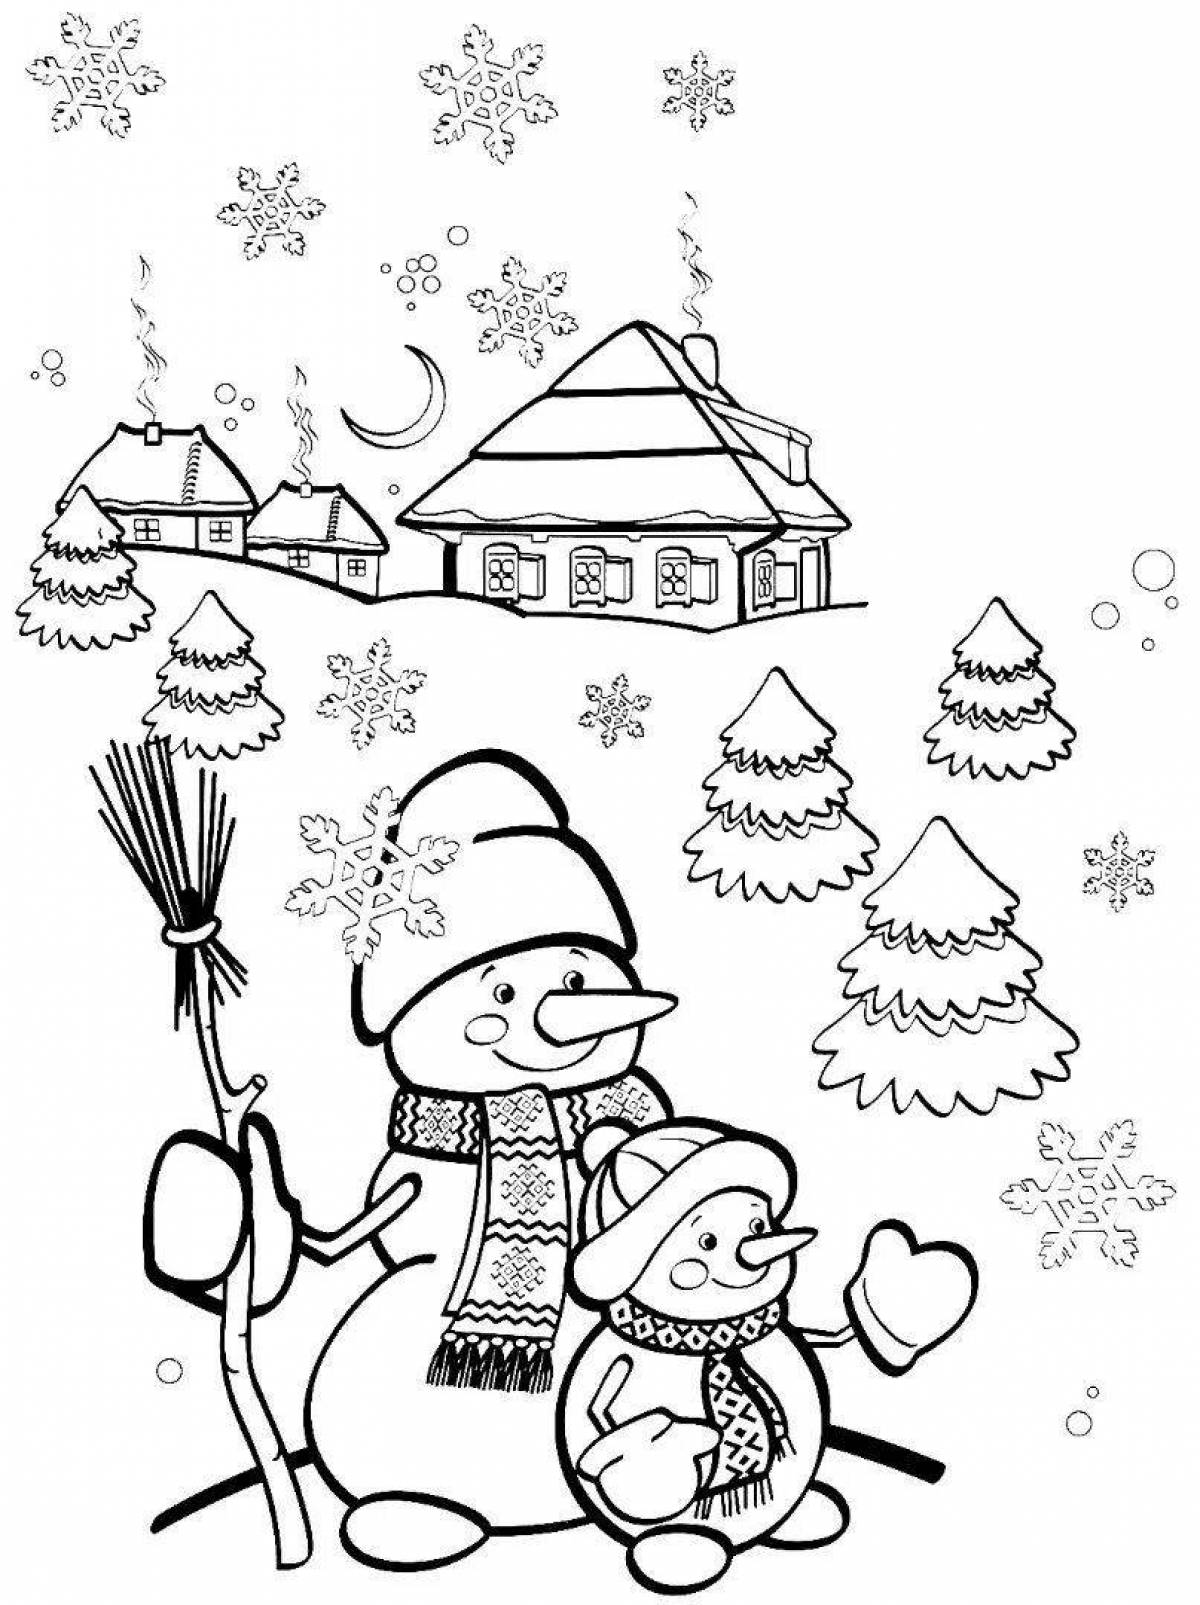 Gorgeous winter fantasy coloring book